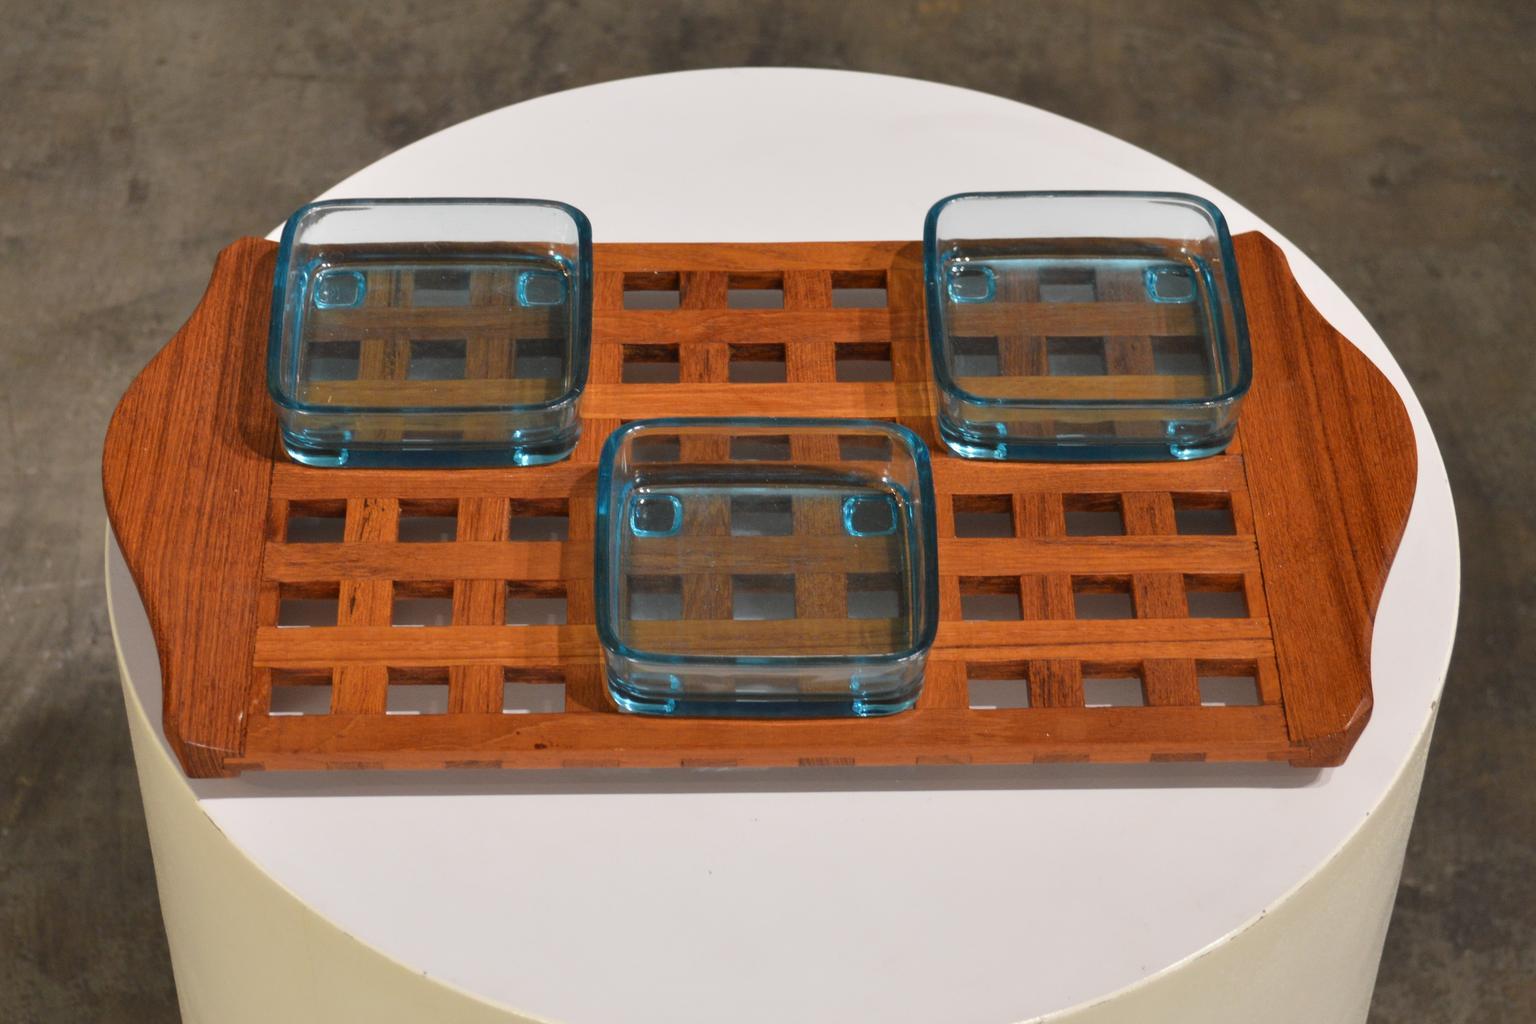 Mid-20th Century Jens Quistgaard Lattice Teak and Glass Serving Tray for Dansk